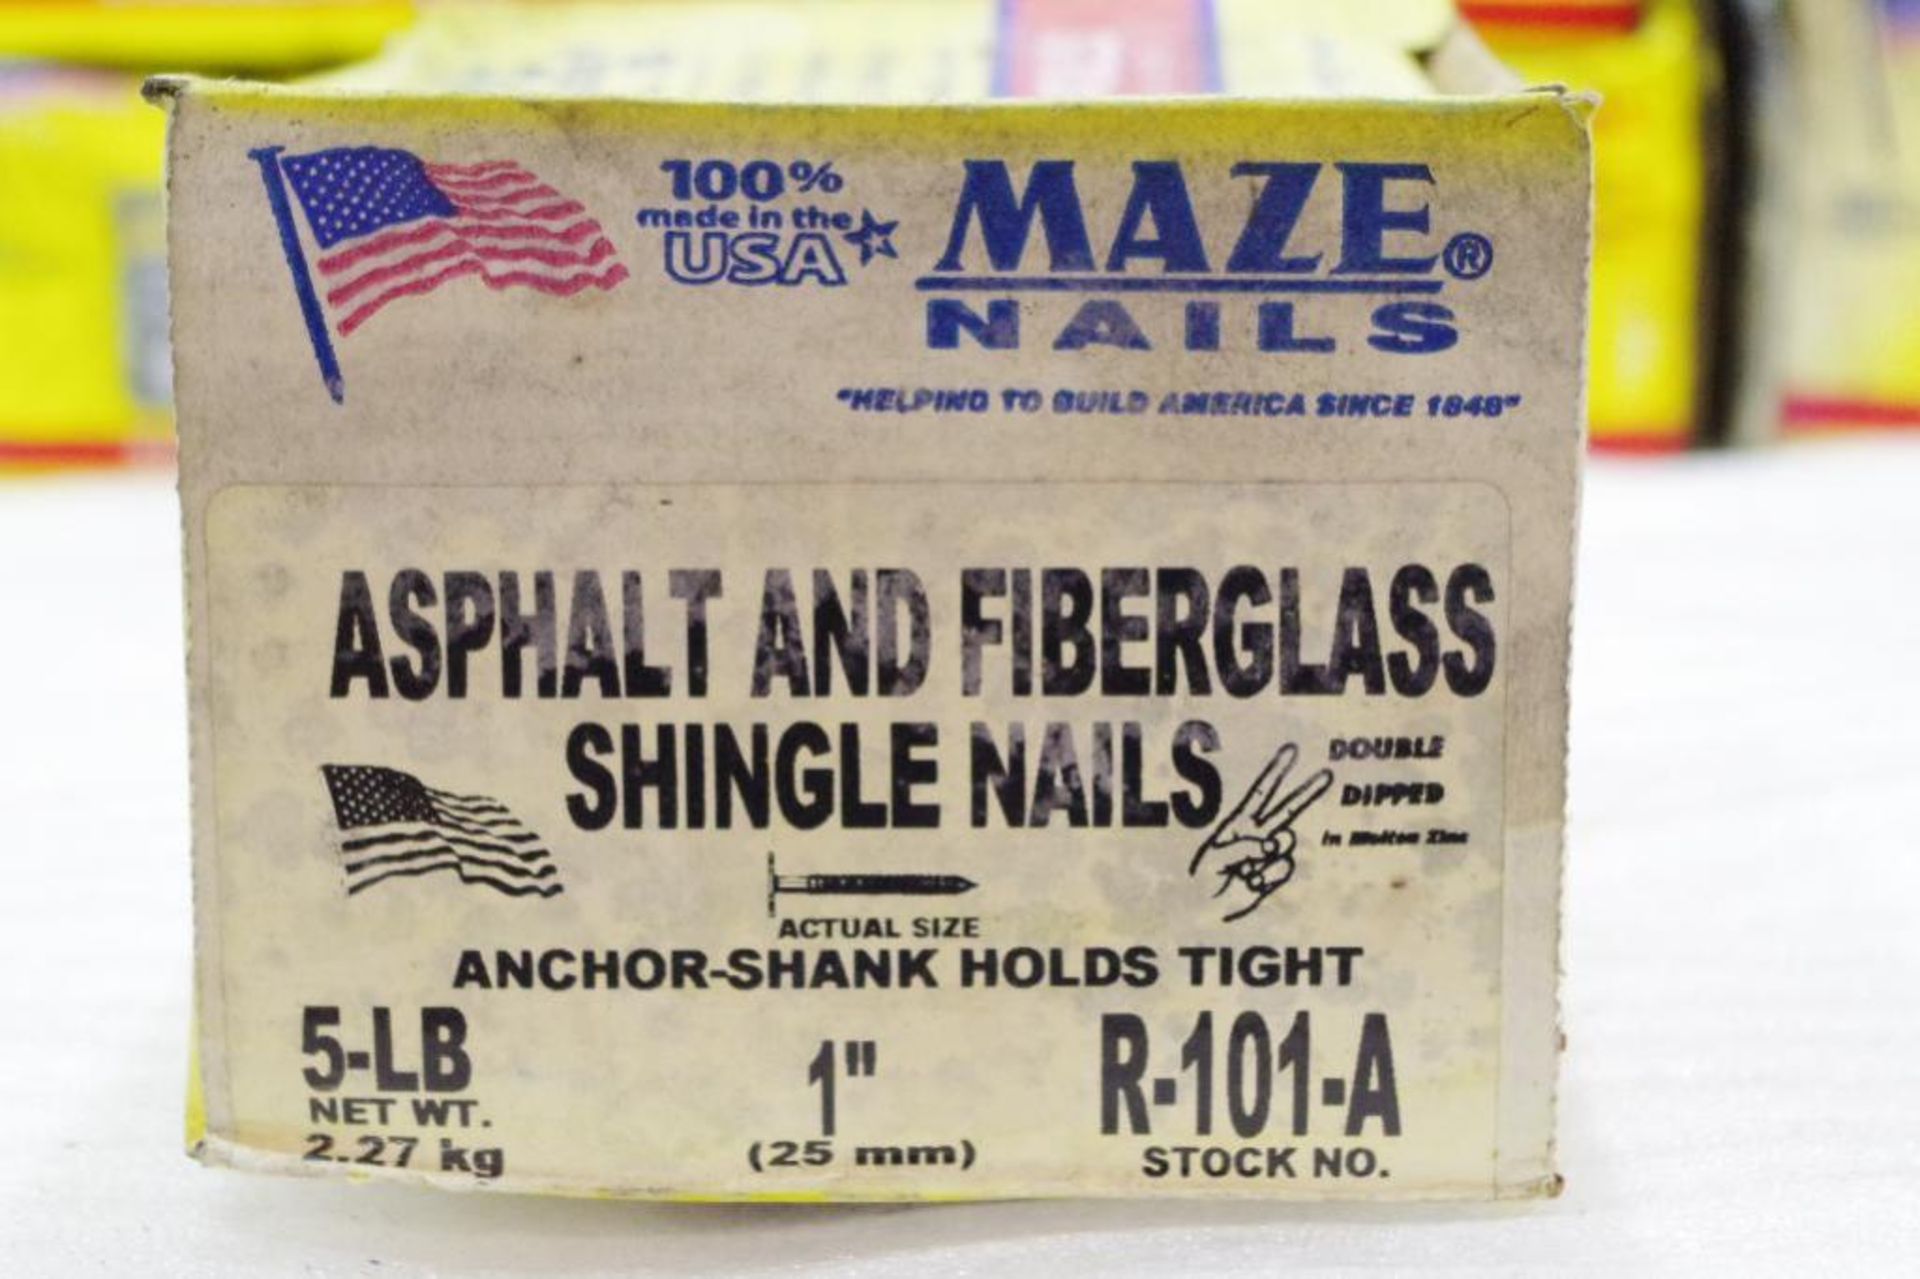 (50) Lbs. MAZE Asphalt and Fiberglass Shingle Nails 1" M/N R-101-A, Made in USA (10 Boxes of 5 Lbs.) - Image 4 of 4